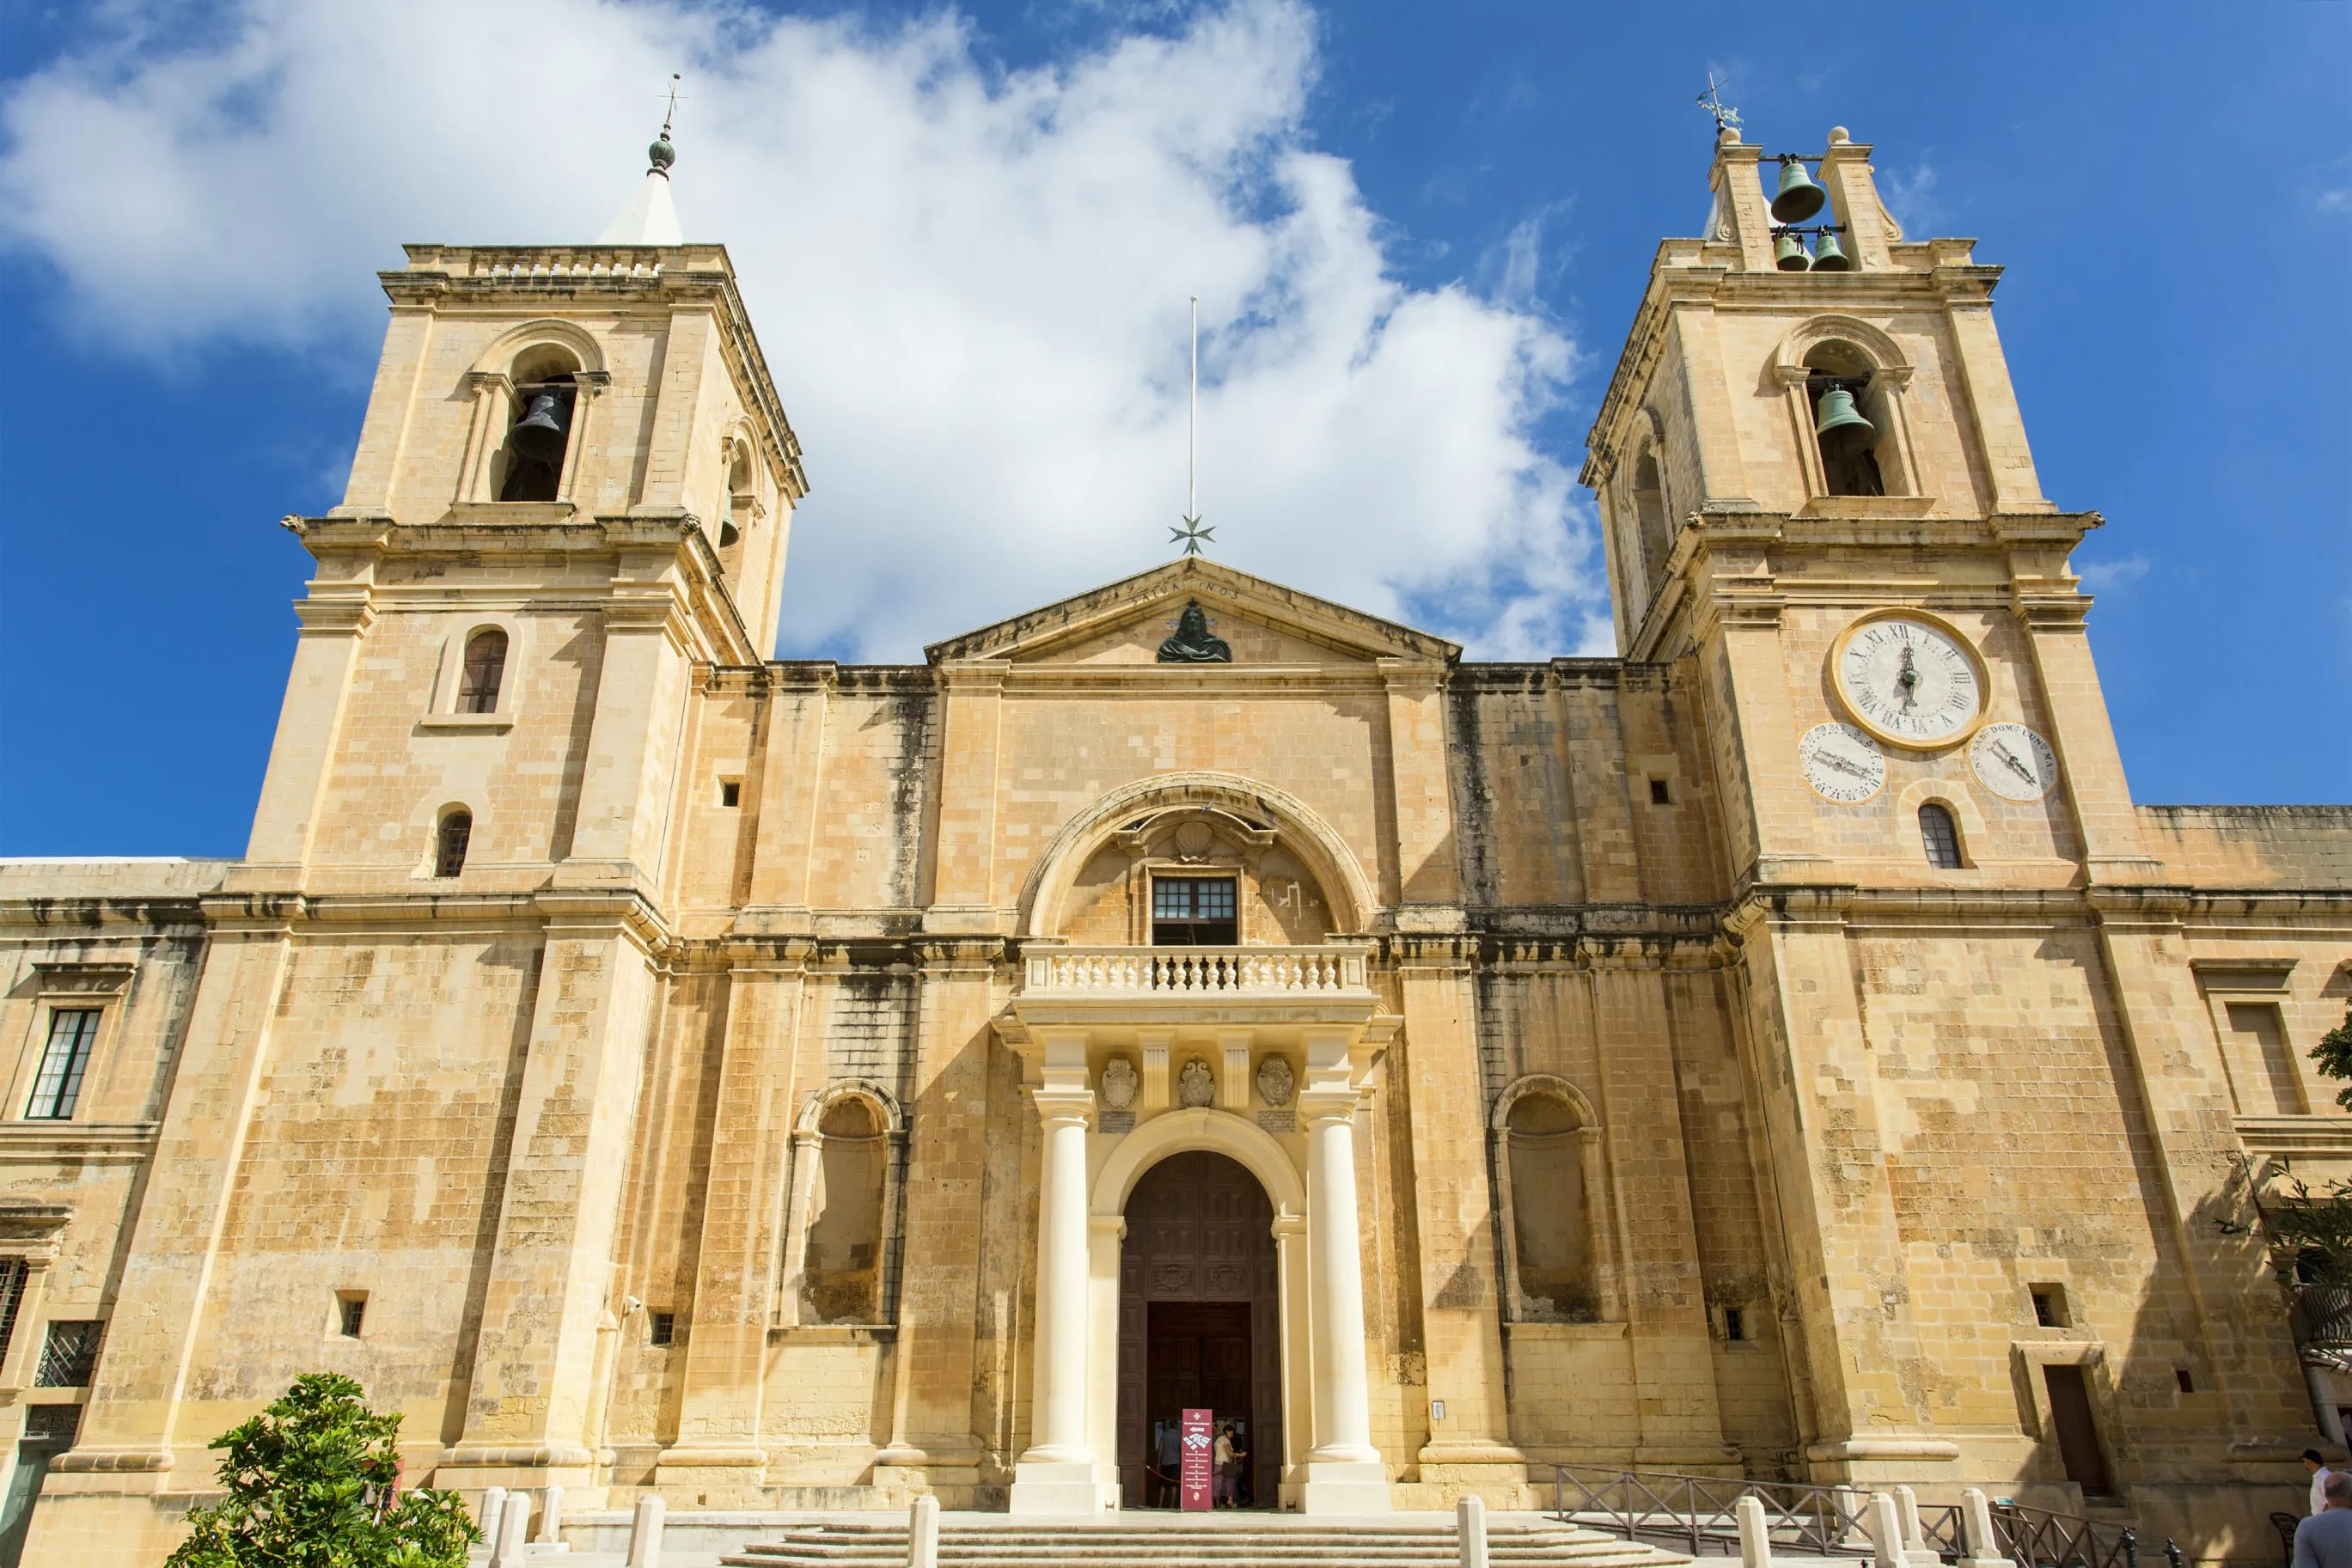 St John's Co-Cathedral in Malta, Europe | Architecture - Rated 4.1